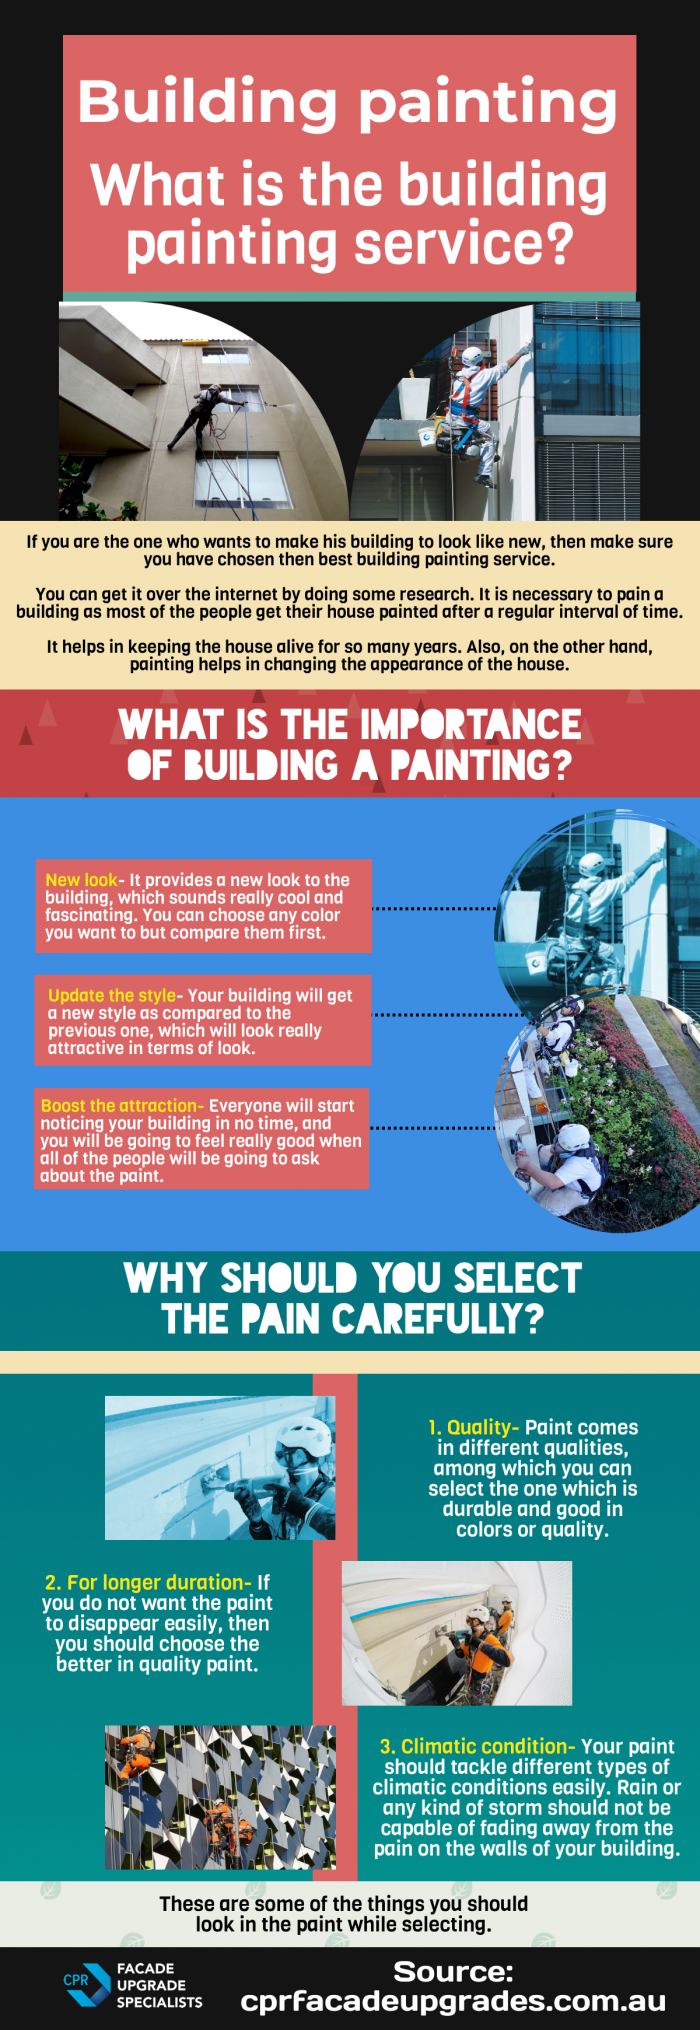 How to choose then best building painting service